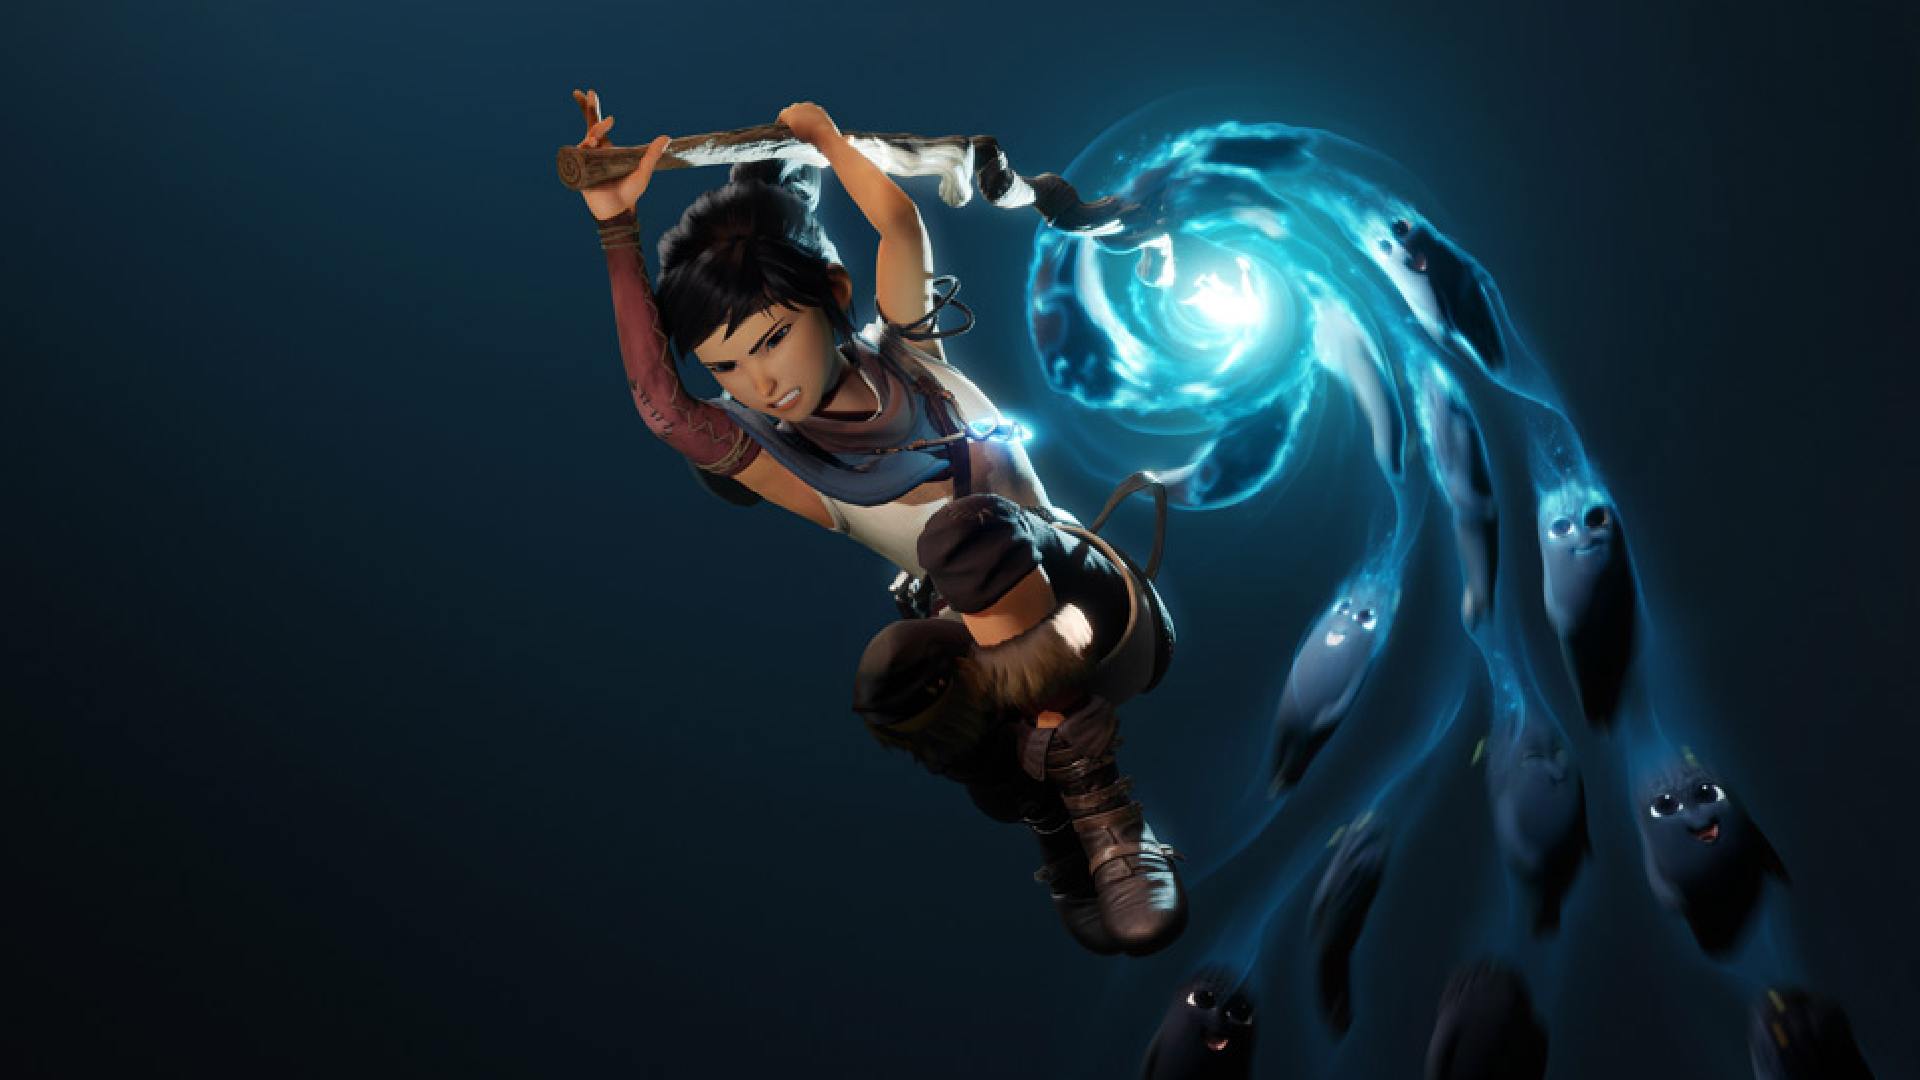 Kena Bridge of Spirits best upgrades: Kena can be seen in a piece of art for the game, using her Rot Hammer ability.